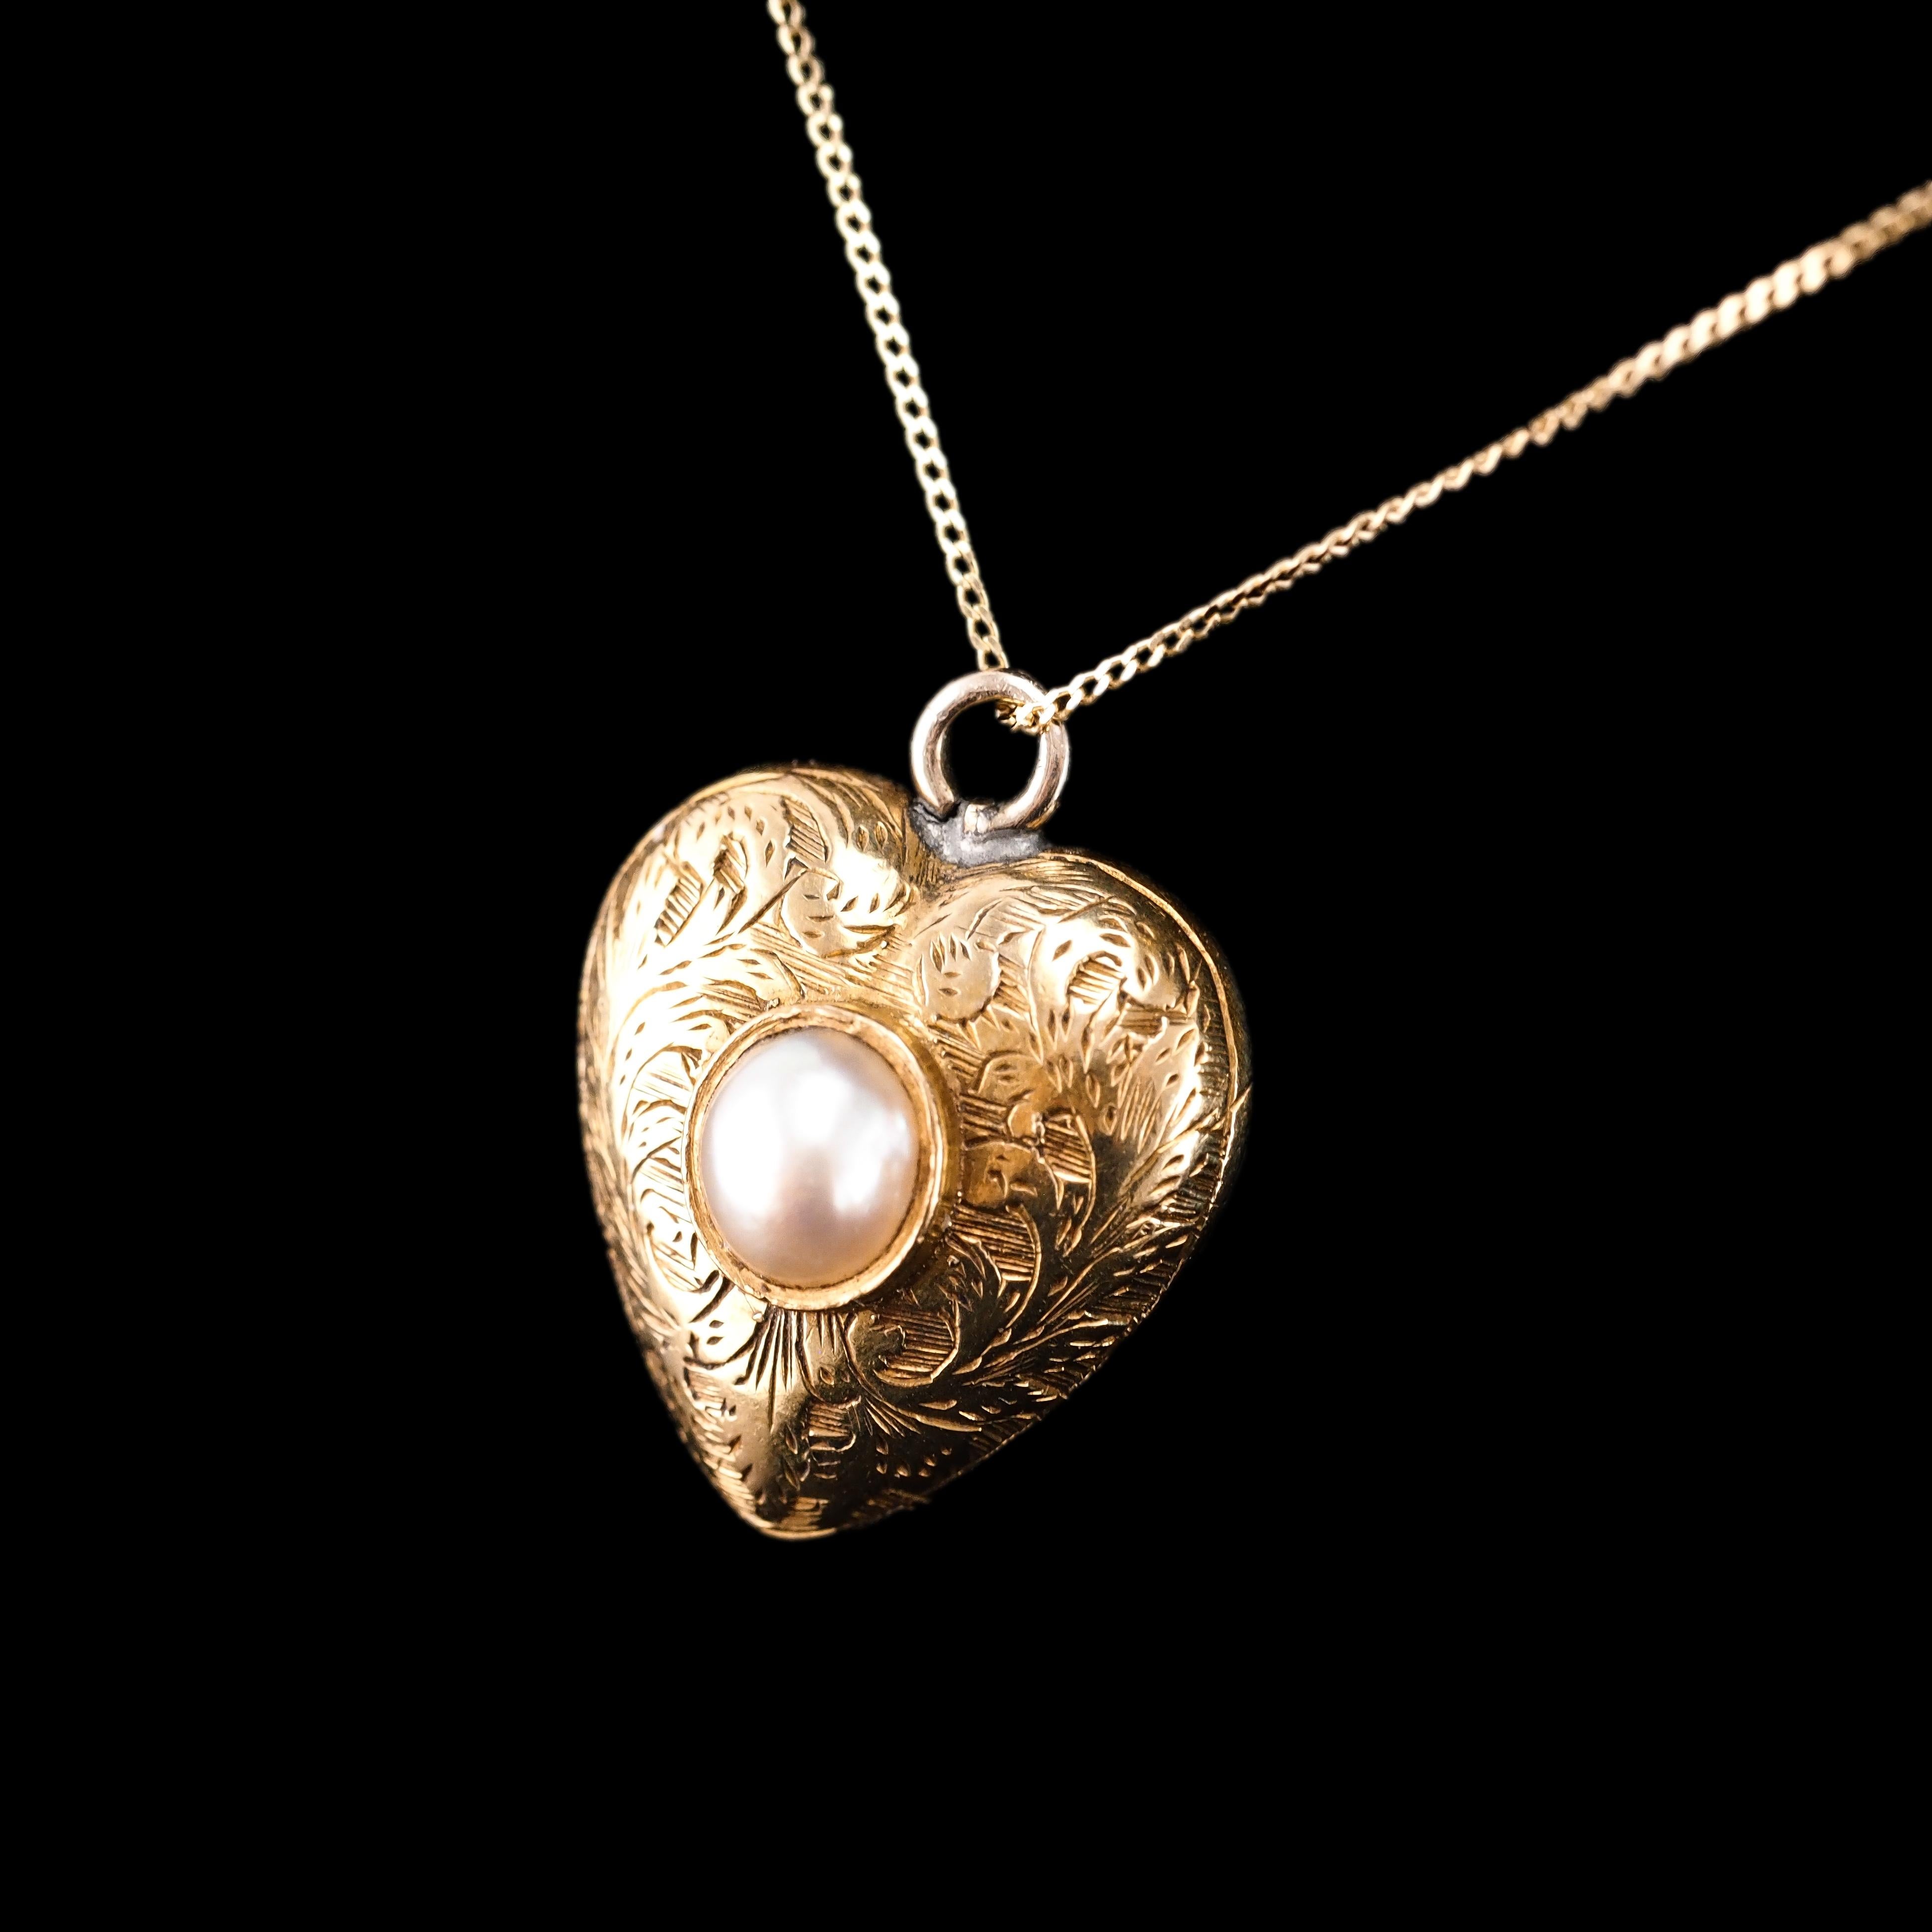 Antique 18K Gold Heart Charm Pendant Necklace with Pearl - Victorian c.1890 1